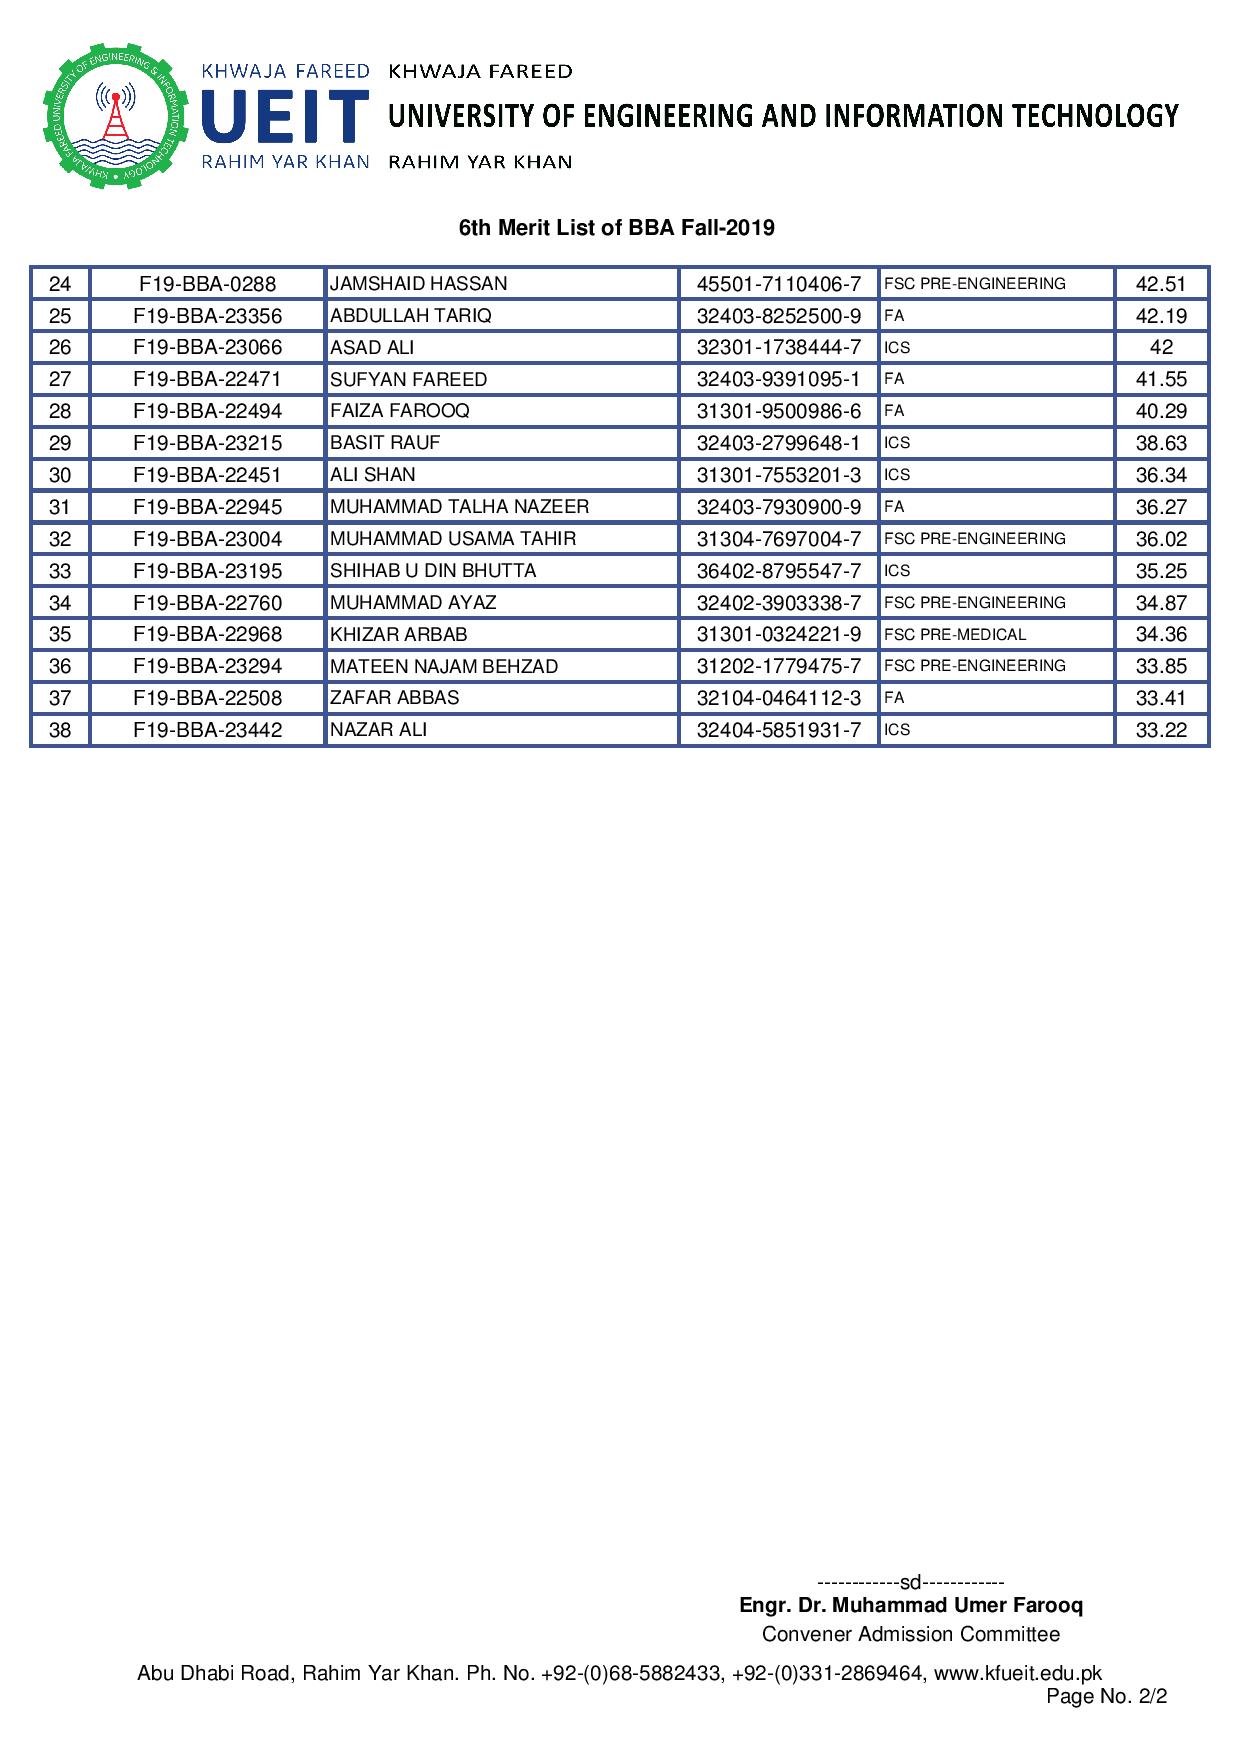 6th Merit List of BBA Fall-2019-page-002